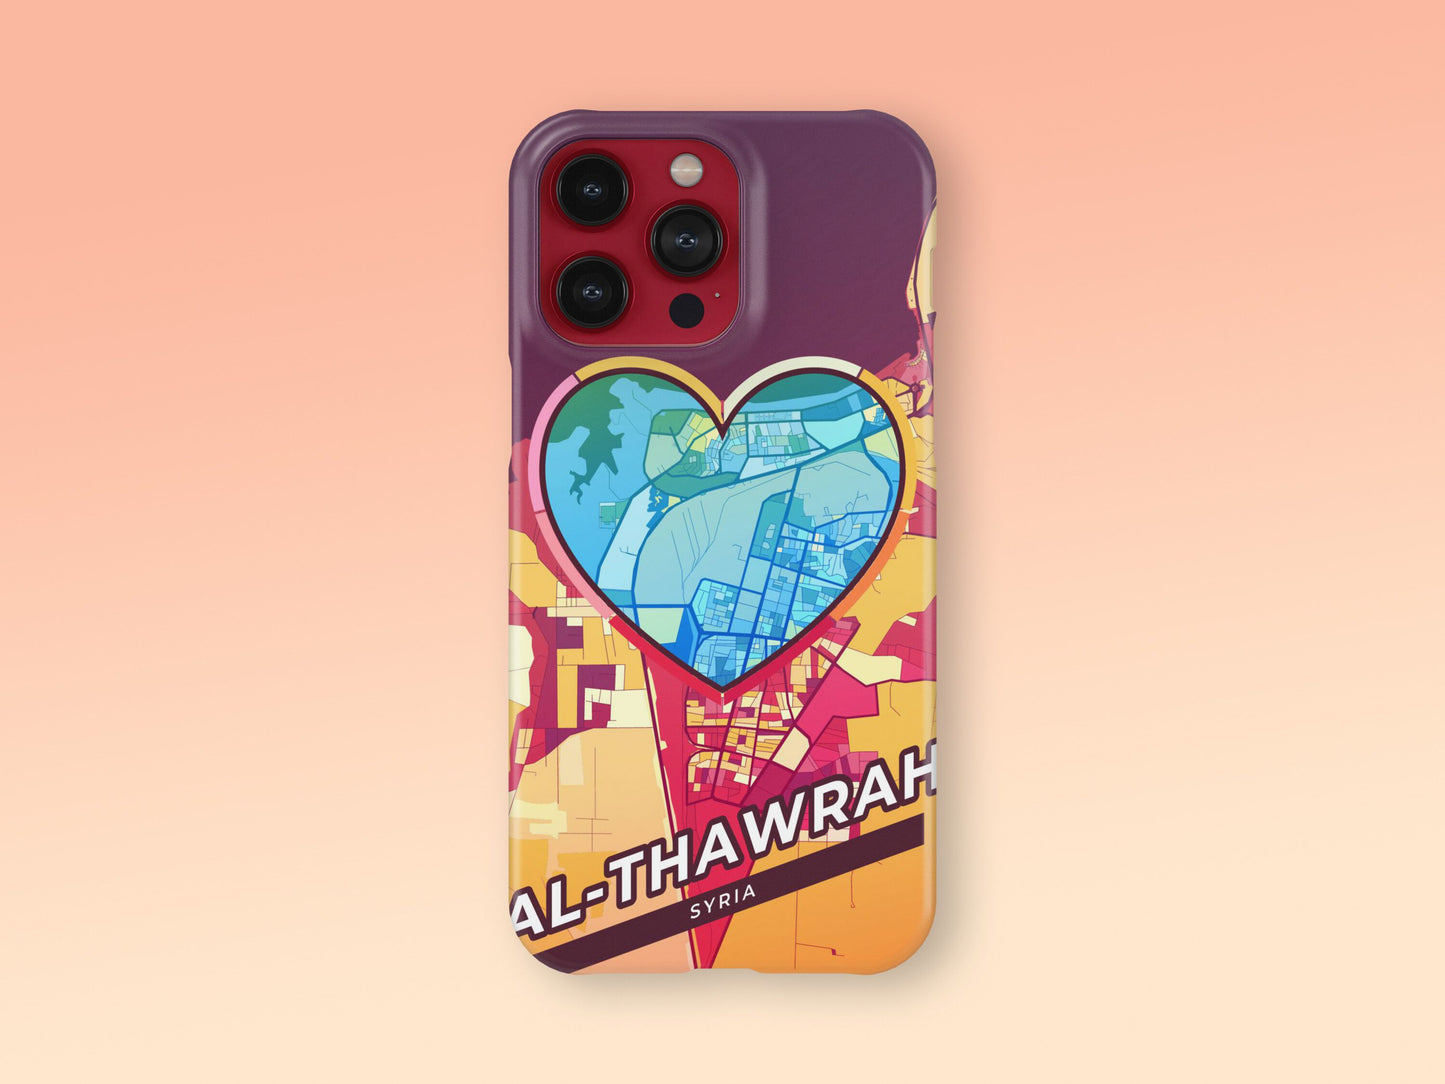 Al-Thawrah Syria slim phone case with colorful icon. Birthday, wedding or housewarming gift. Couple match cases. 2